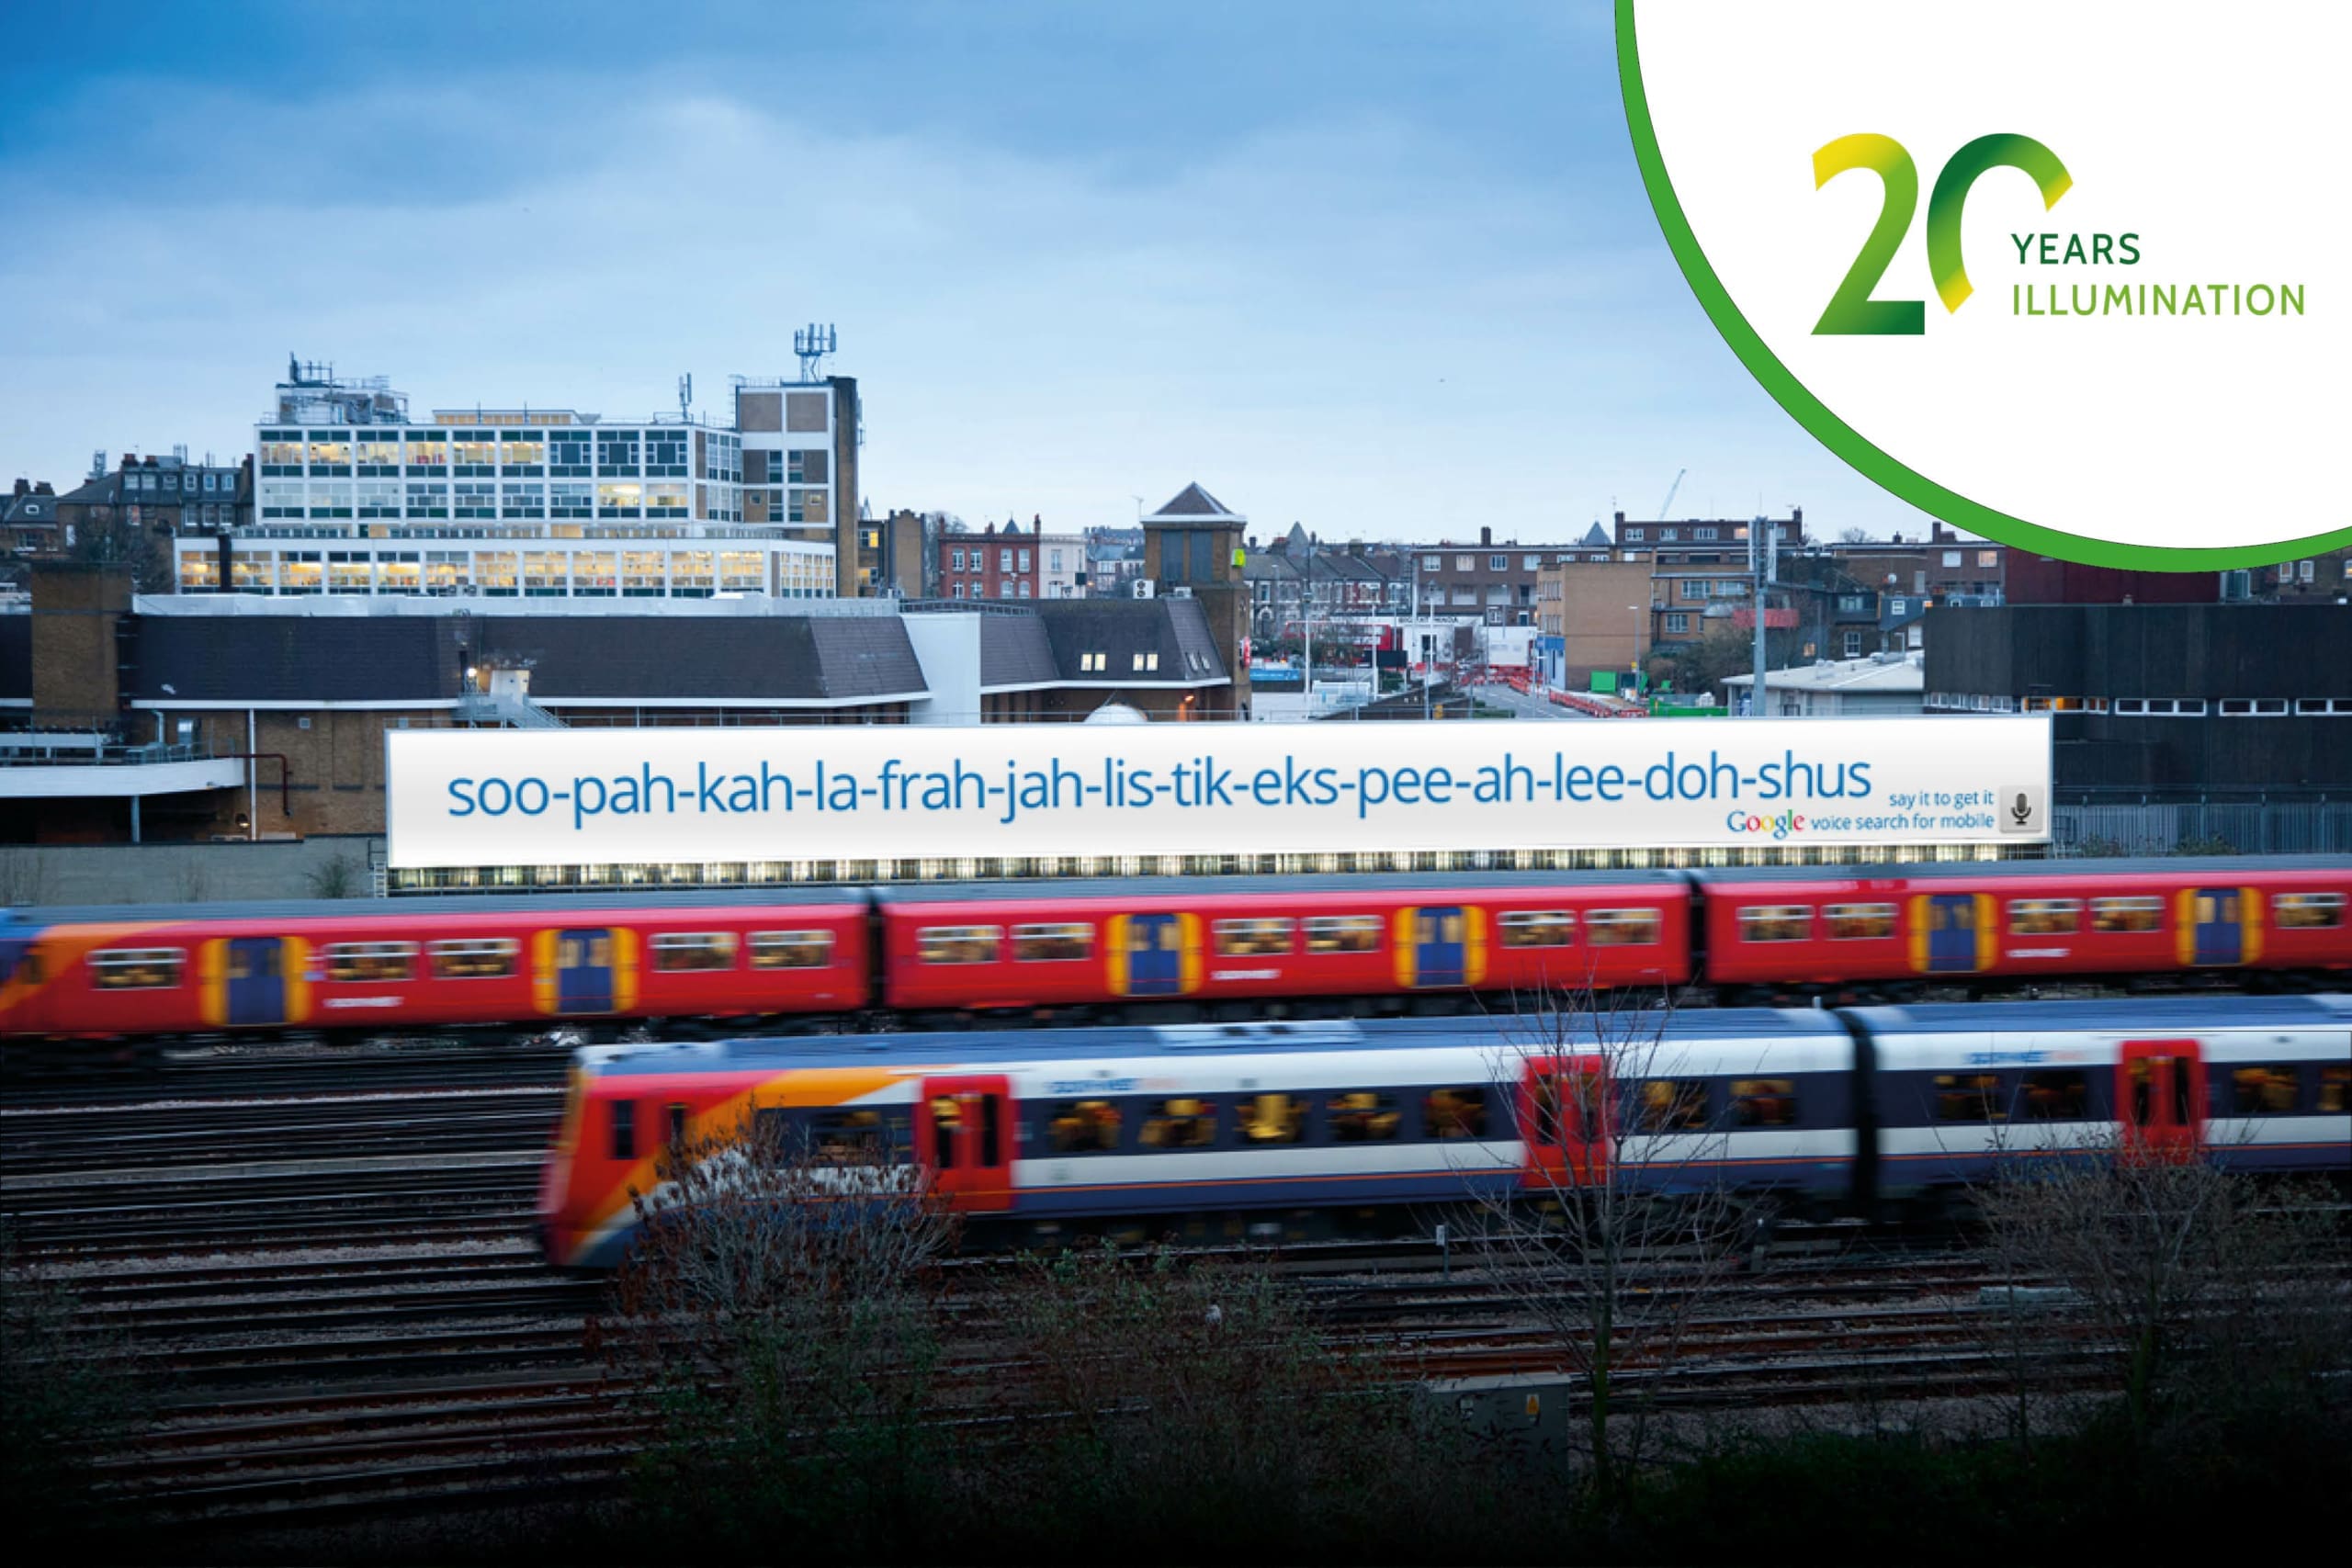 A train moves swiftly on tracks in an urban area, with buildings and houses in the background. An illuminated billboard featuring large format advertising displays the word "soo-pah-kah-la-frah-jah-lis-tik-eks-pee-ah-lee-doh-shus." A "20 Years Illumination" logo is in the top-right corner.